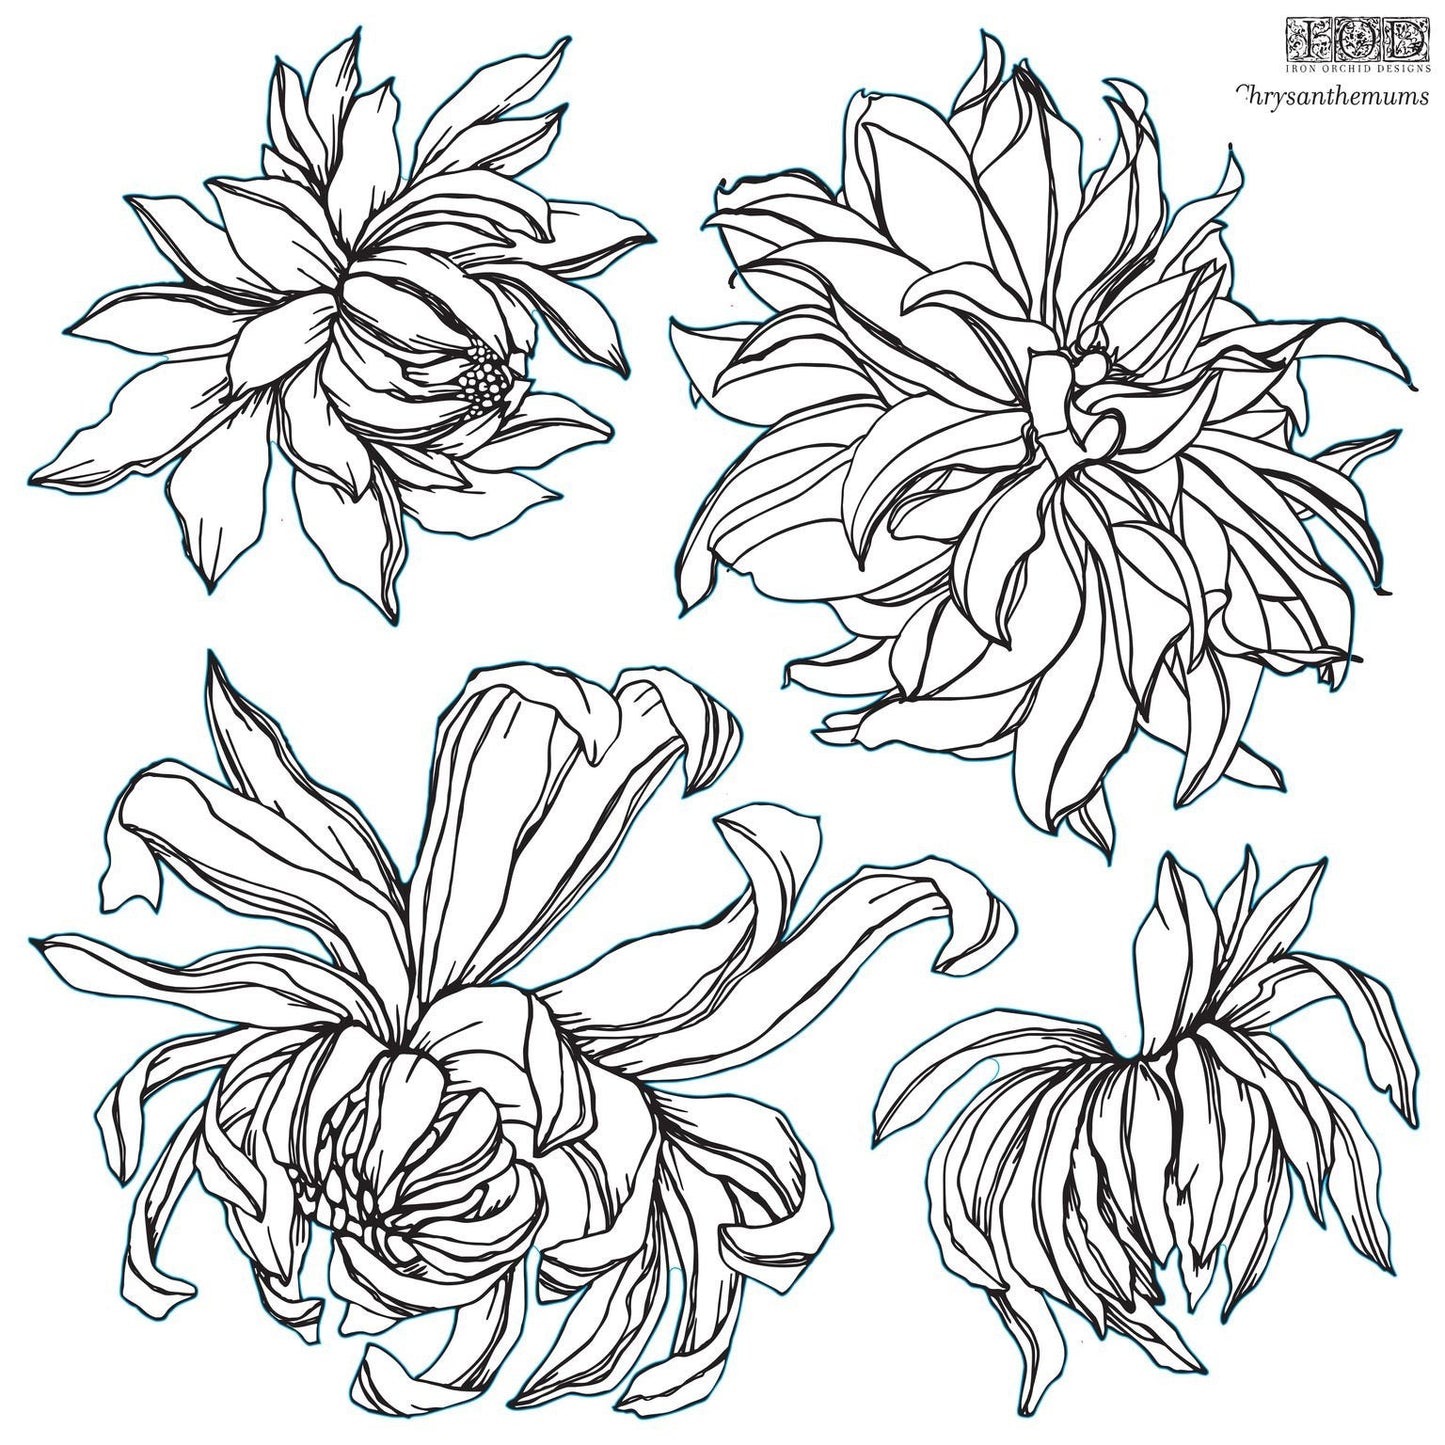 Chrysanthemum 12 X 12  IOD stamp 2 sheets - by Iron Orchid Designs